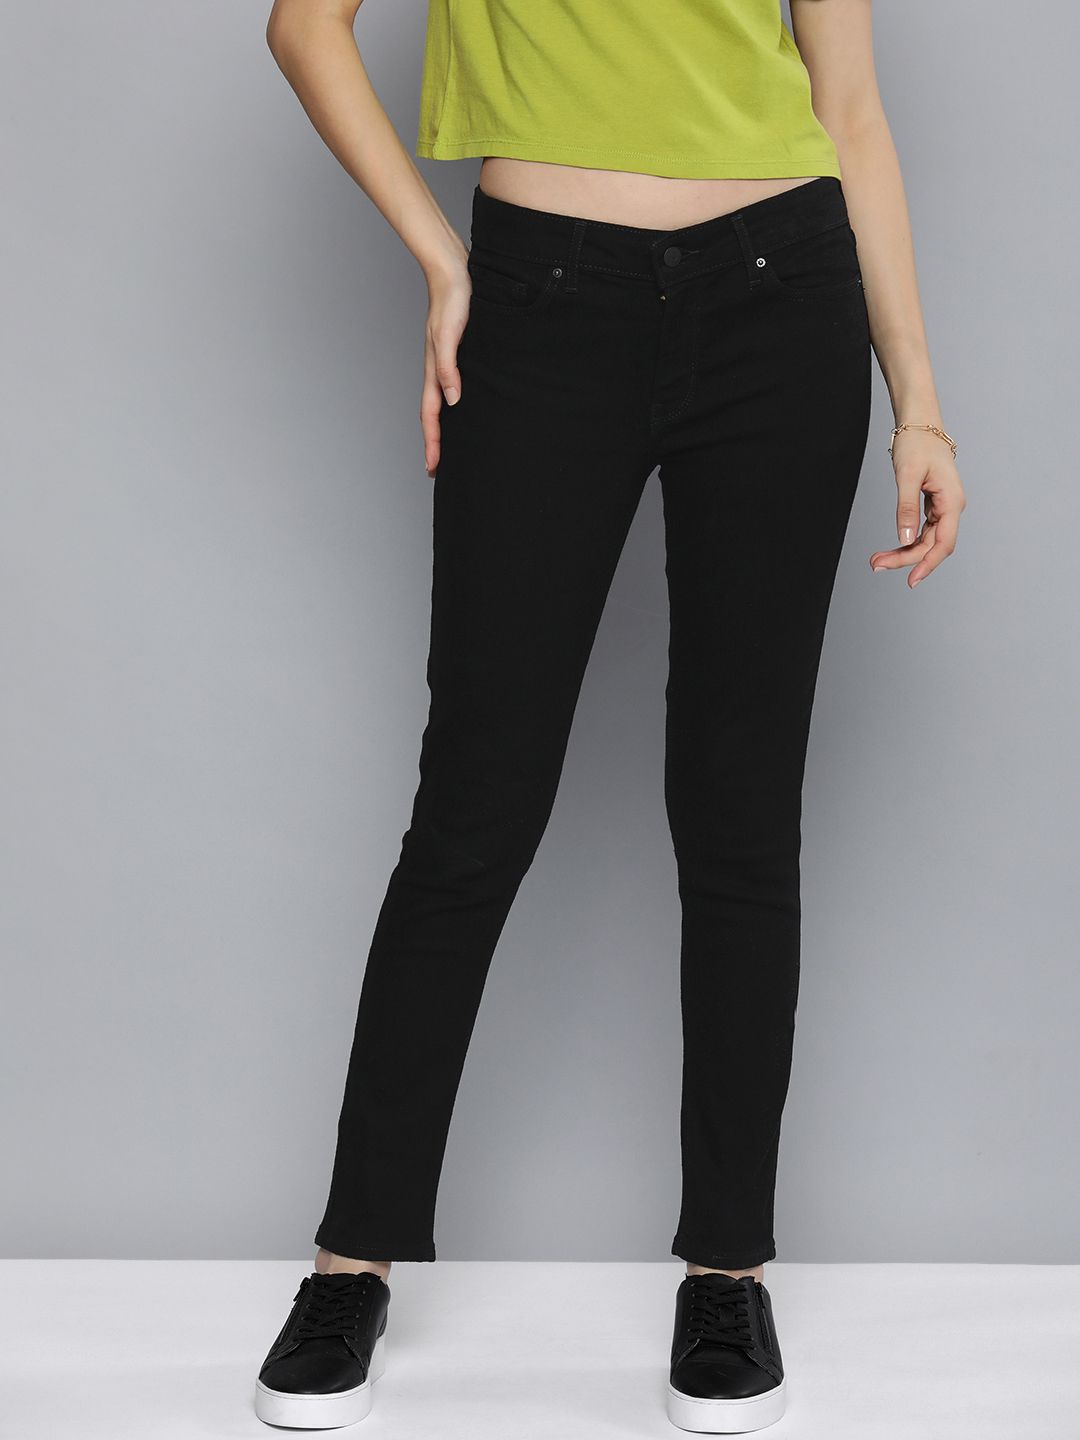 Levis Women Black 711 Skinny Fit Stretchable Jeans Price in India